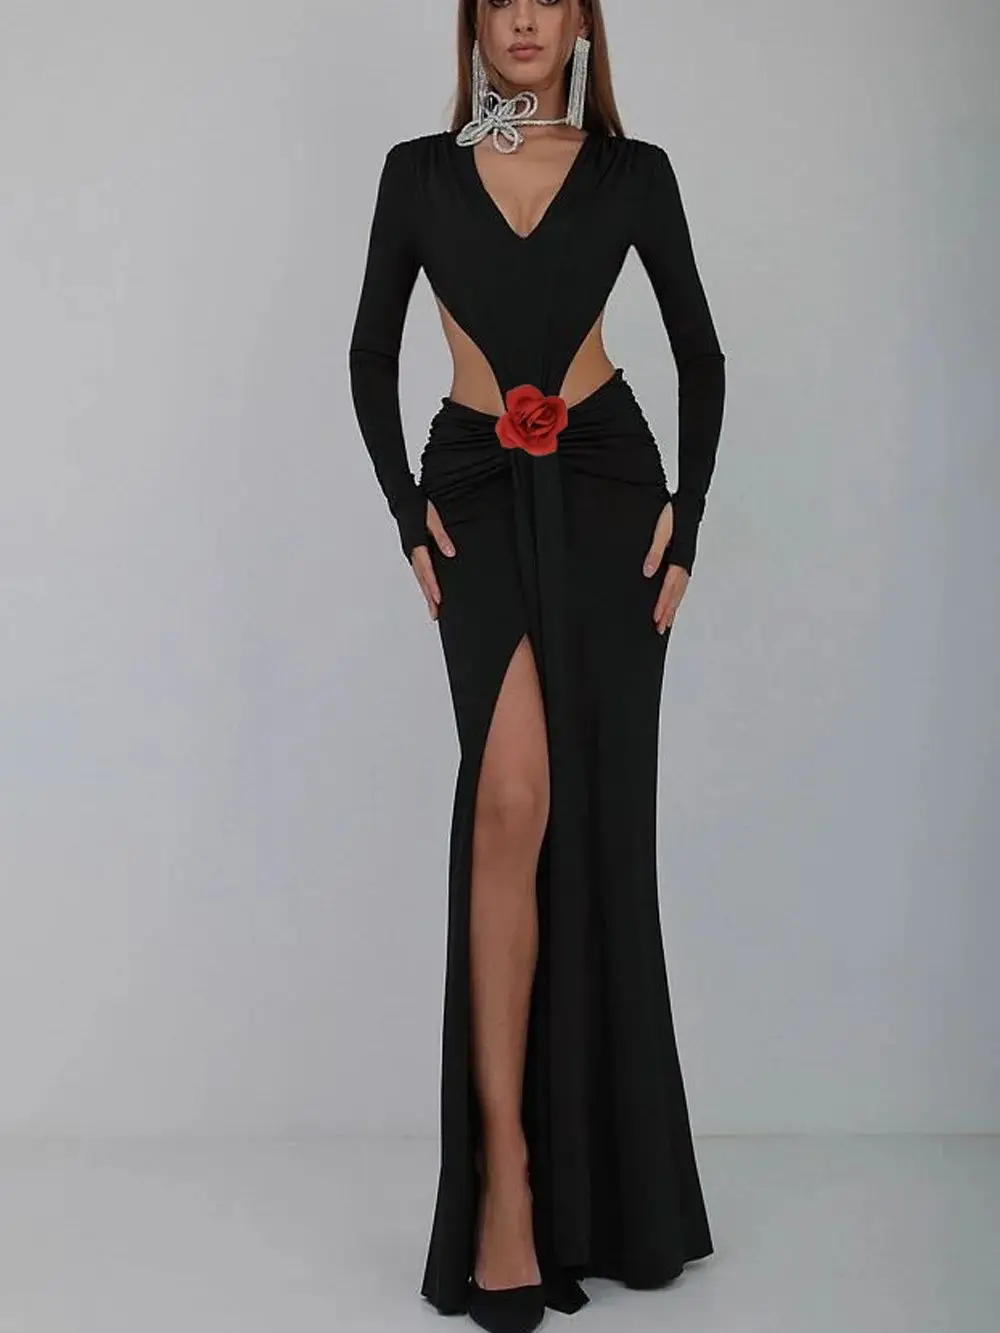 

New Women Luxury Sexy Long Sleeve Backless Flower Cotton Black Long Gowns Celebrity Elegant Evening Trumpet Party Maxi Dress